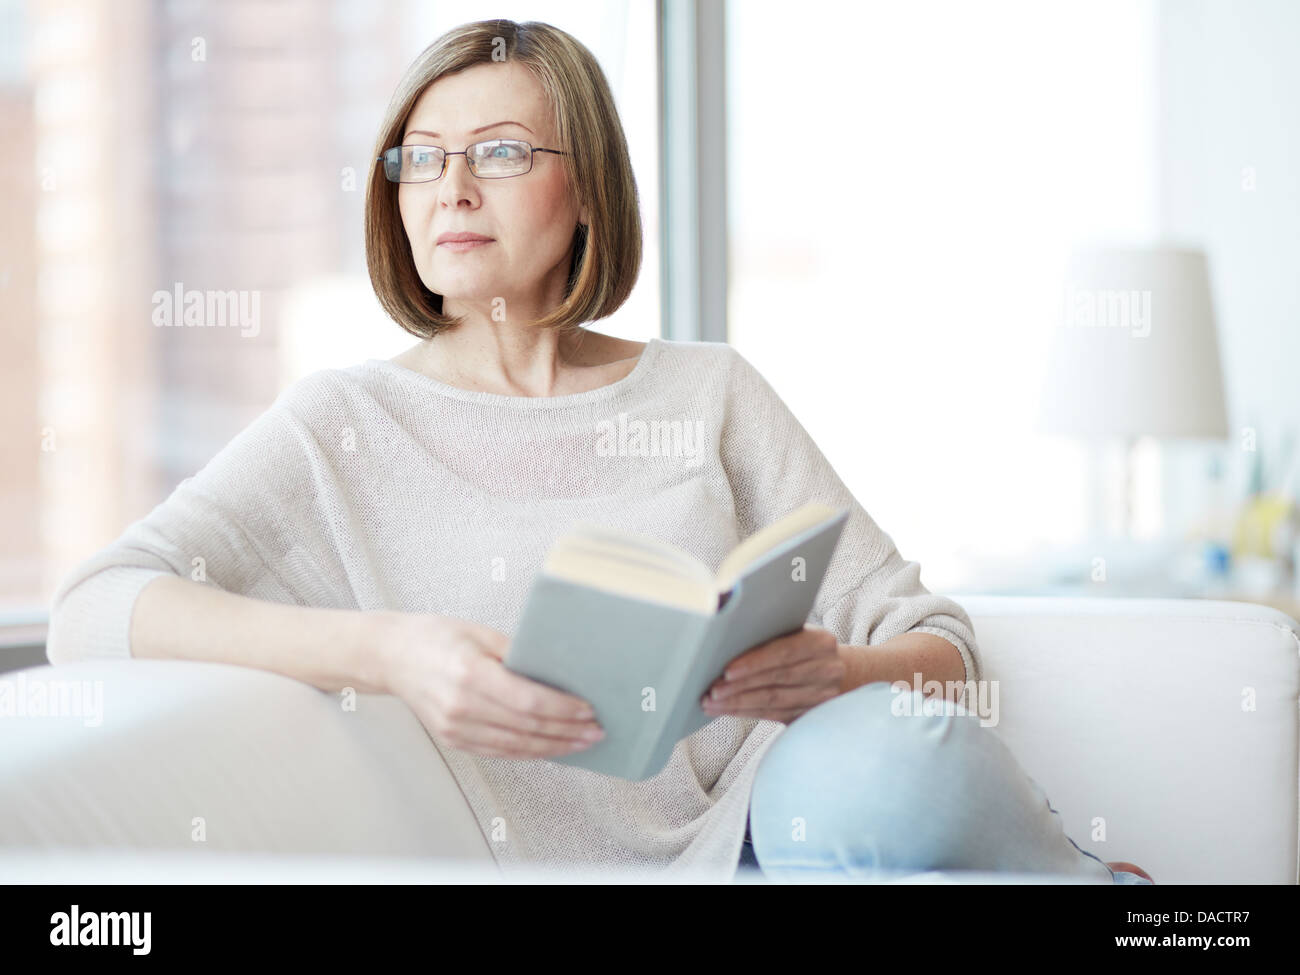 Charming mid age lady enjoying being at home and reading Stock Photo